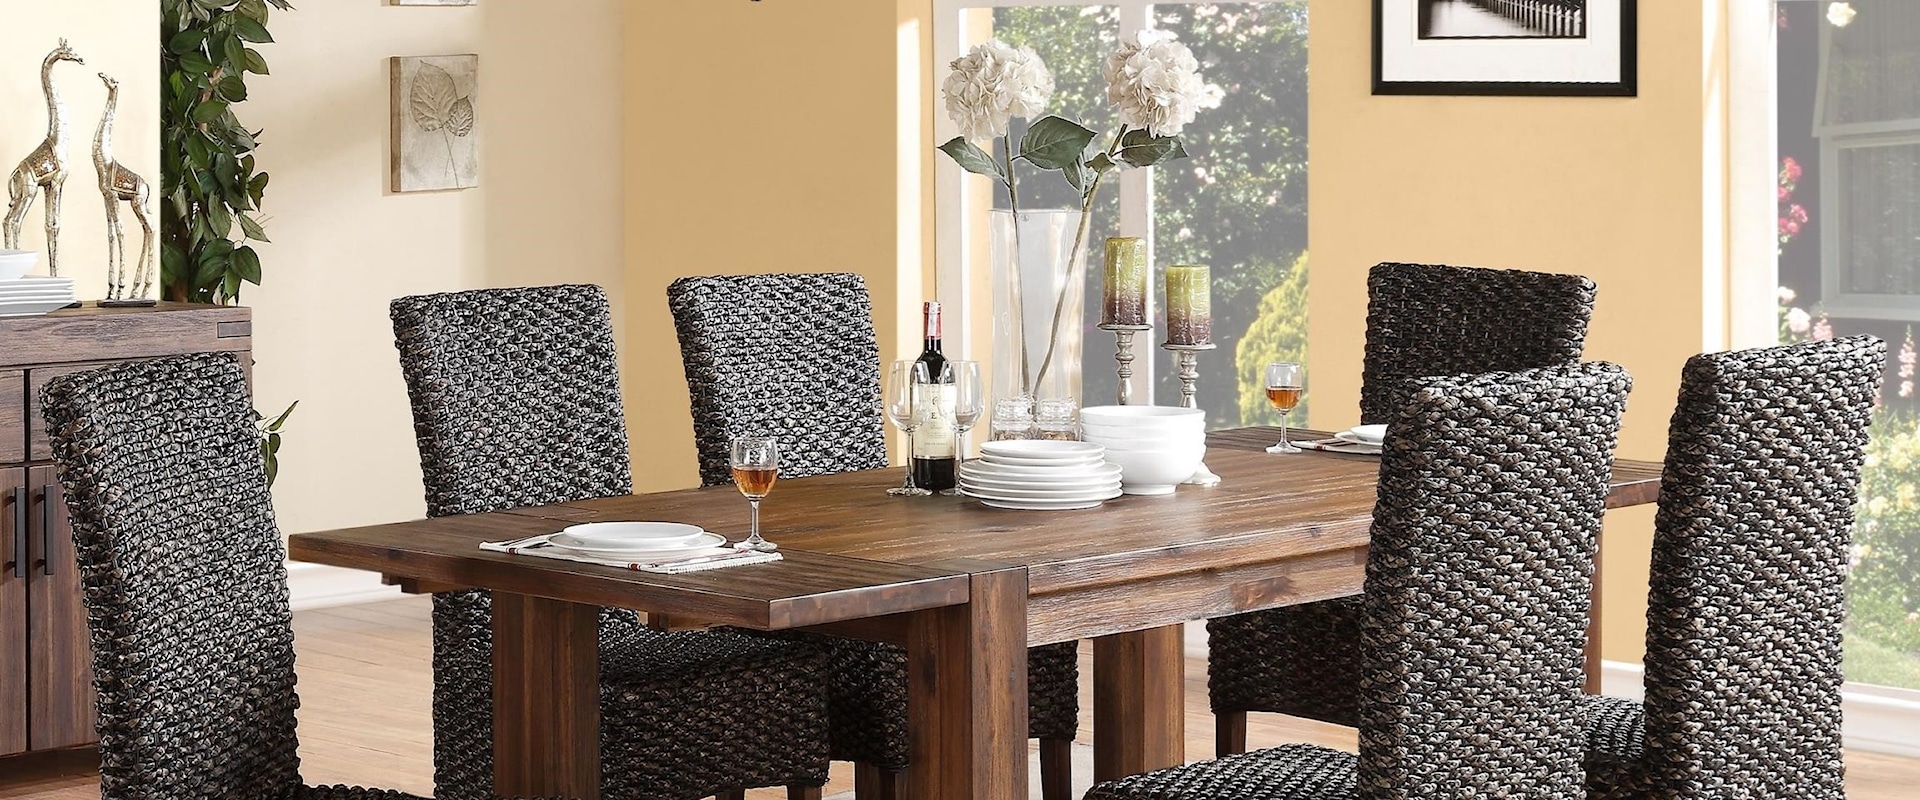 7-Piece Table & Chair Set with Wicker Chairs